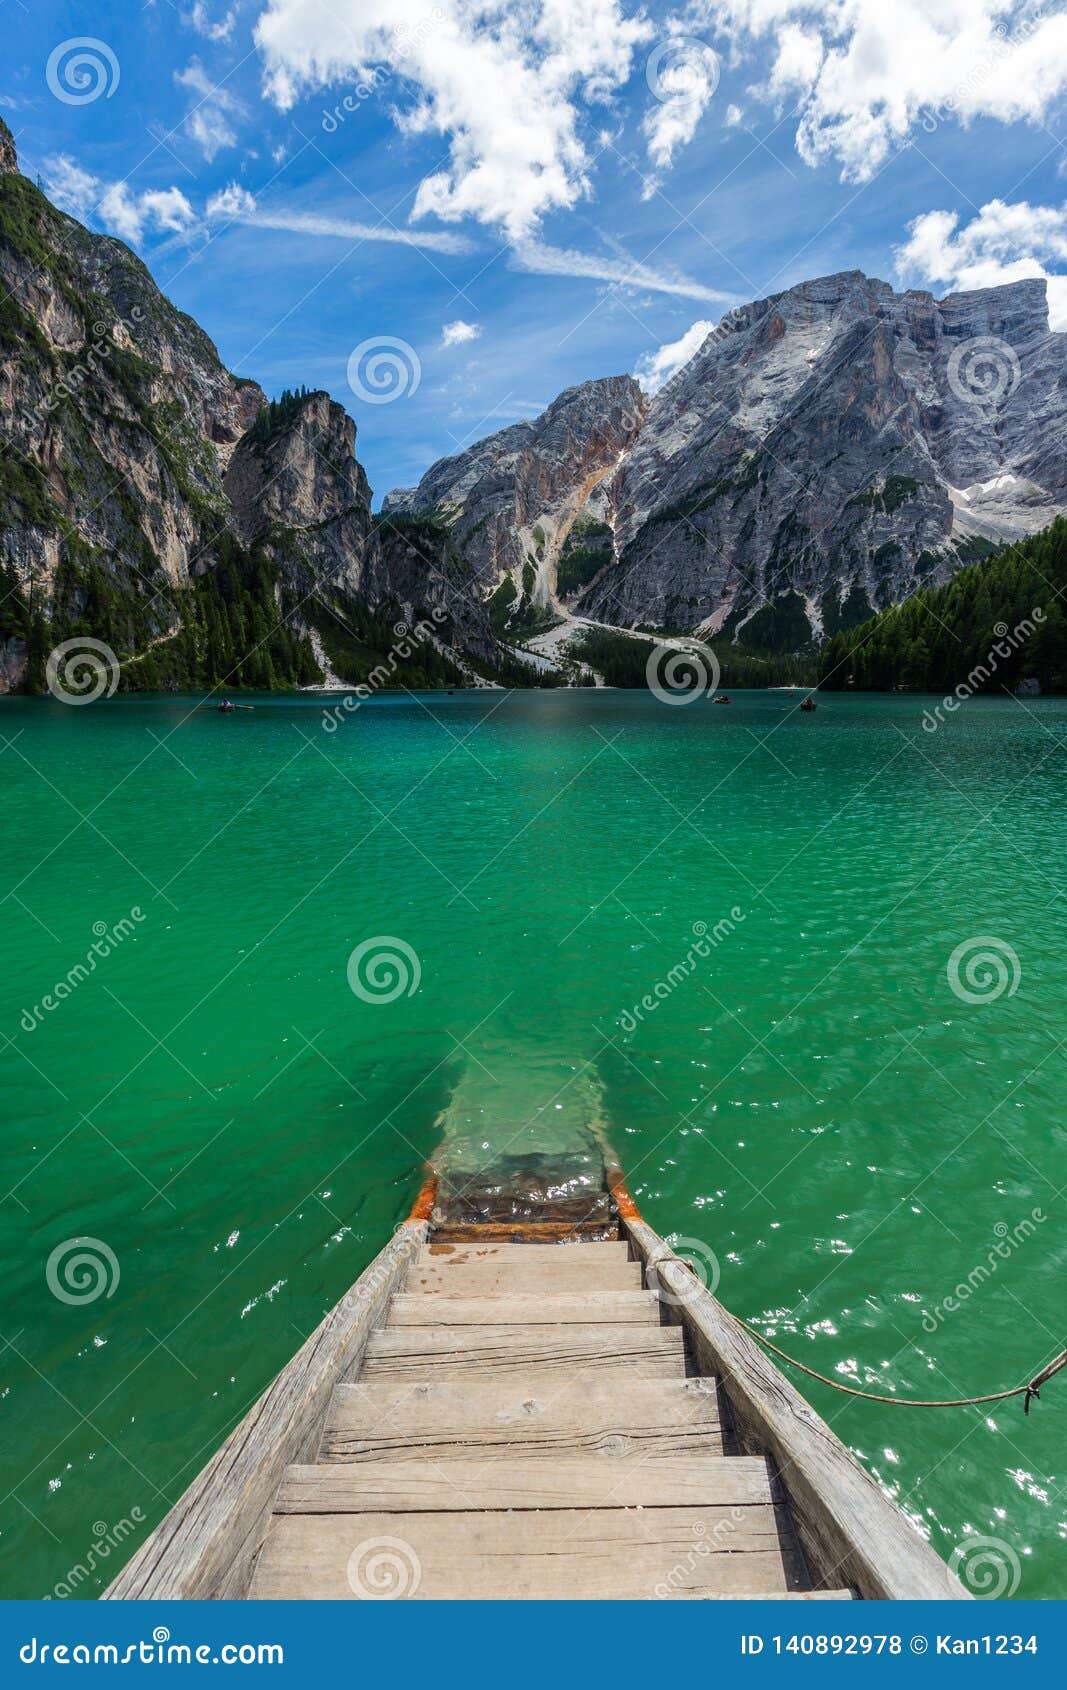 amazing view of turquoise lago di braies lake or pragser wildsee in dolomite, italy